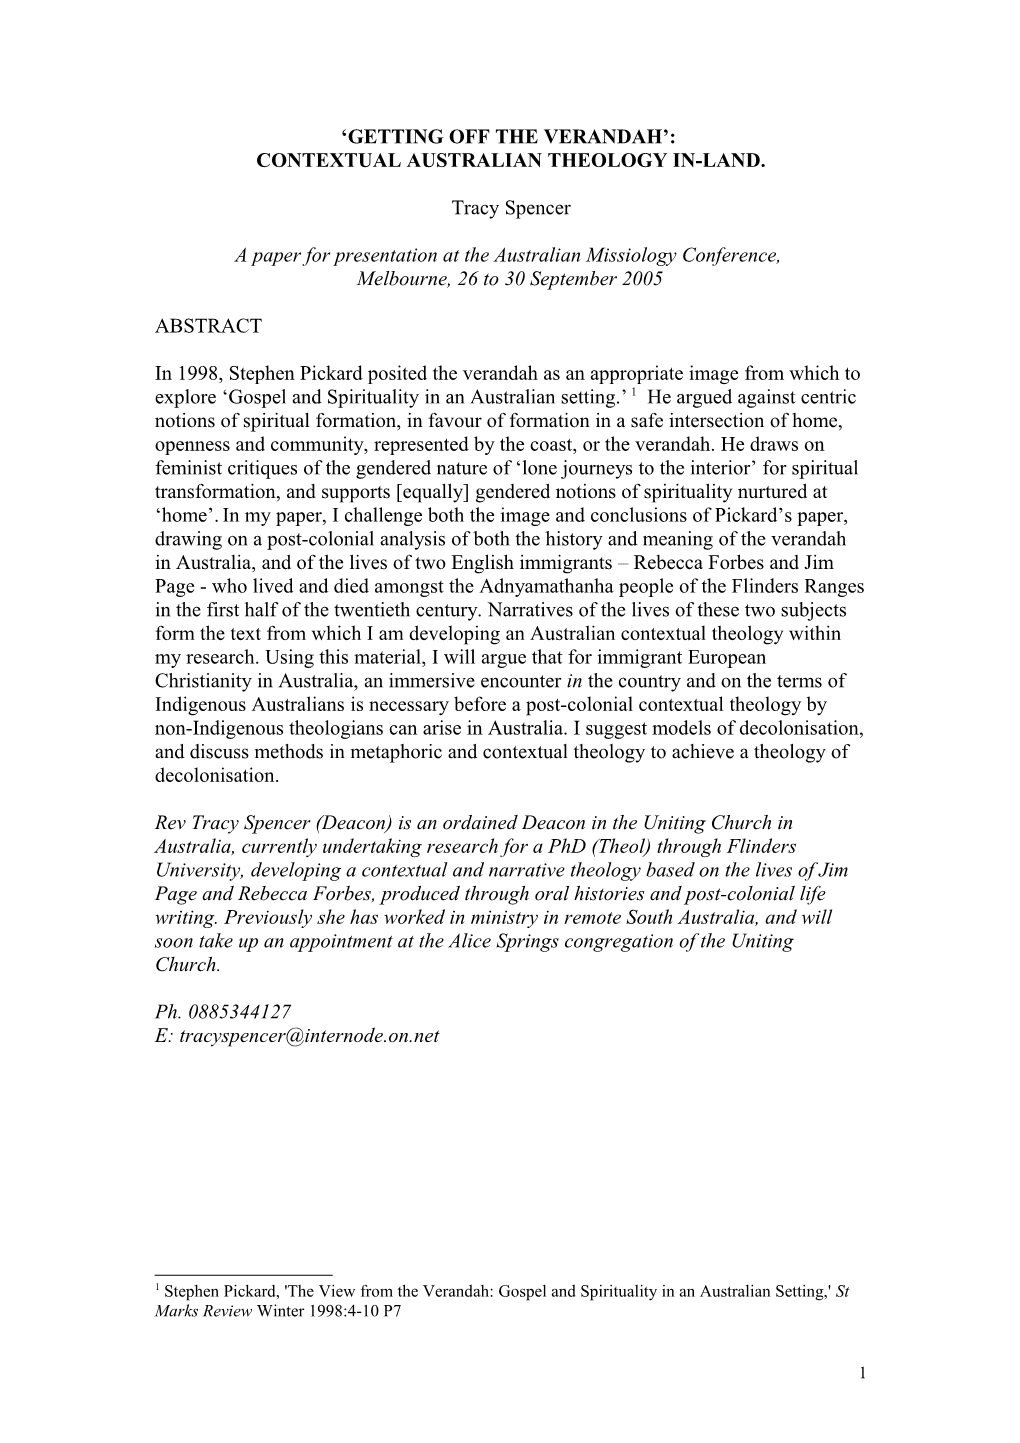 Abstract for Australian Missiology Conference 2005